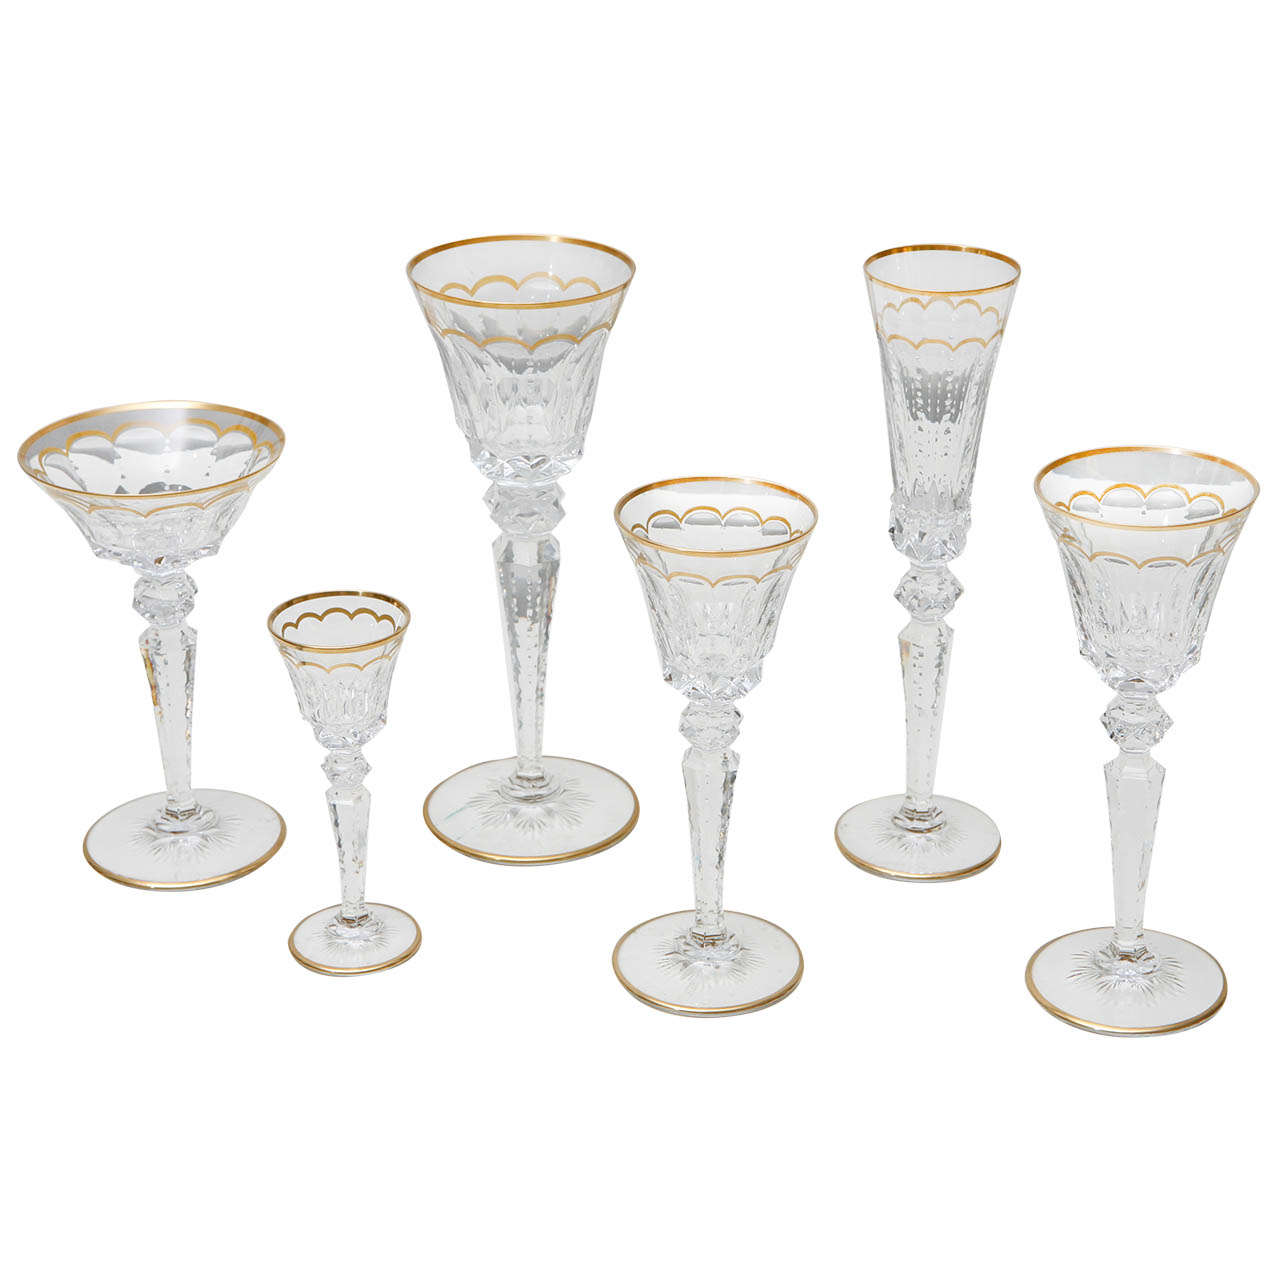 Saint-Louis set of 175 Cut Crystal Glasses For Sale at 1stdibs